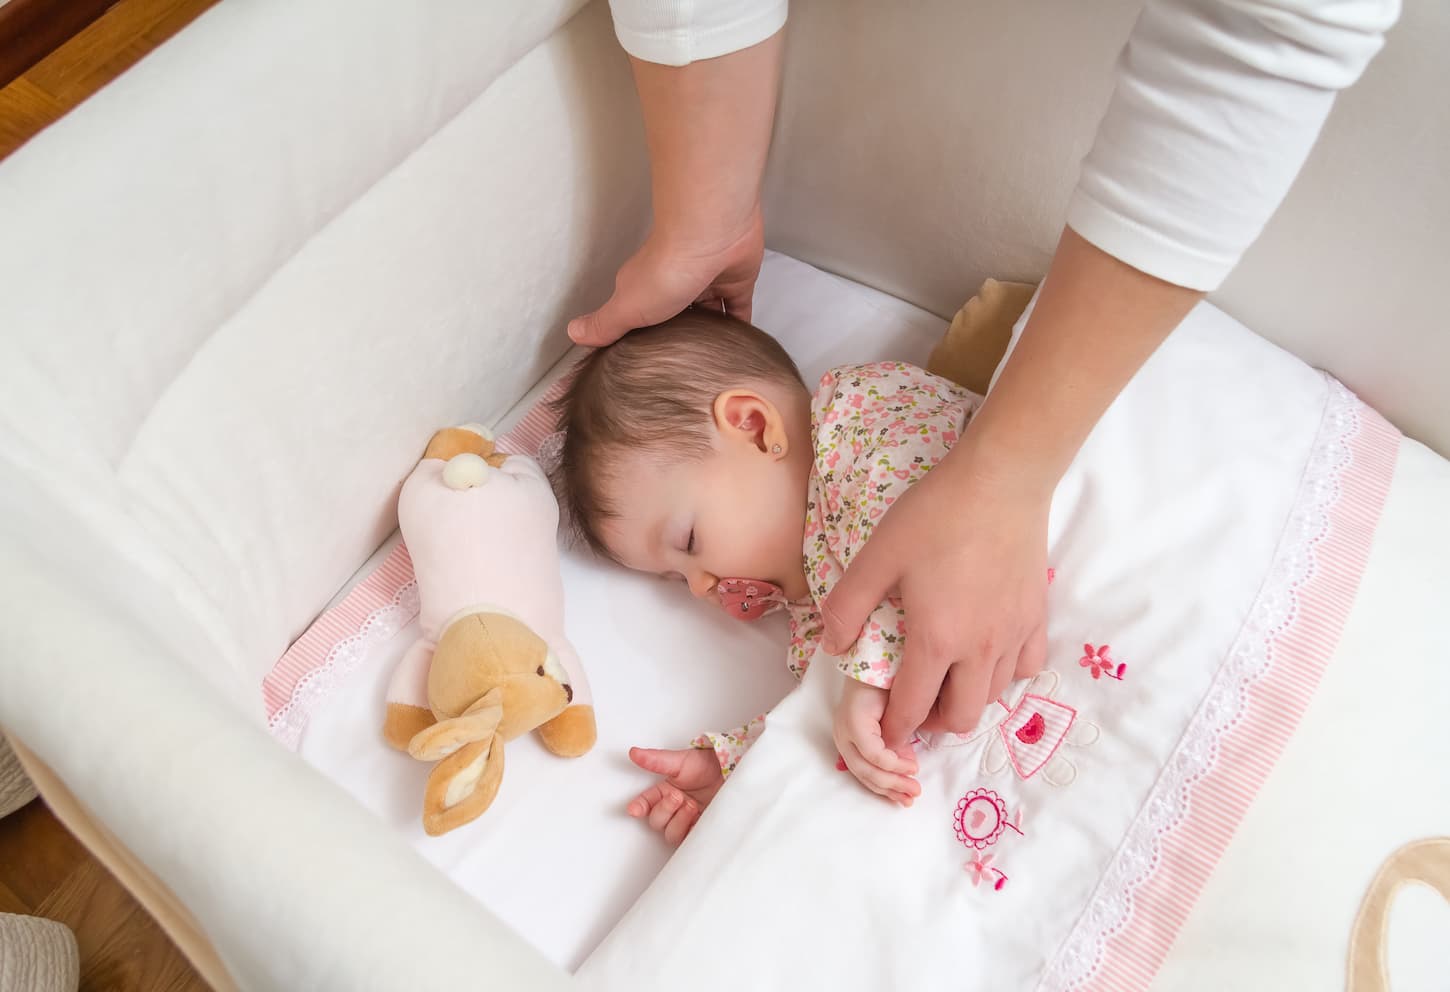 An image of a mother's hands caressing her cute baby girl sleeping in a cot with a pacifier and stuffed toy.